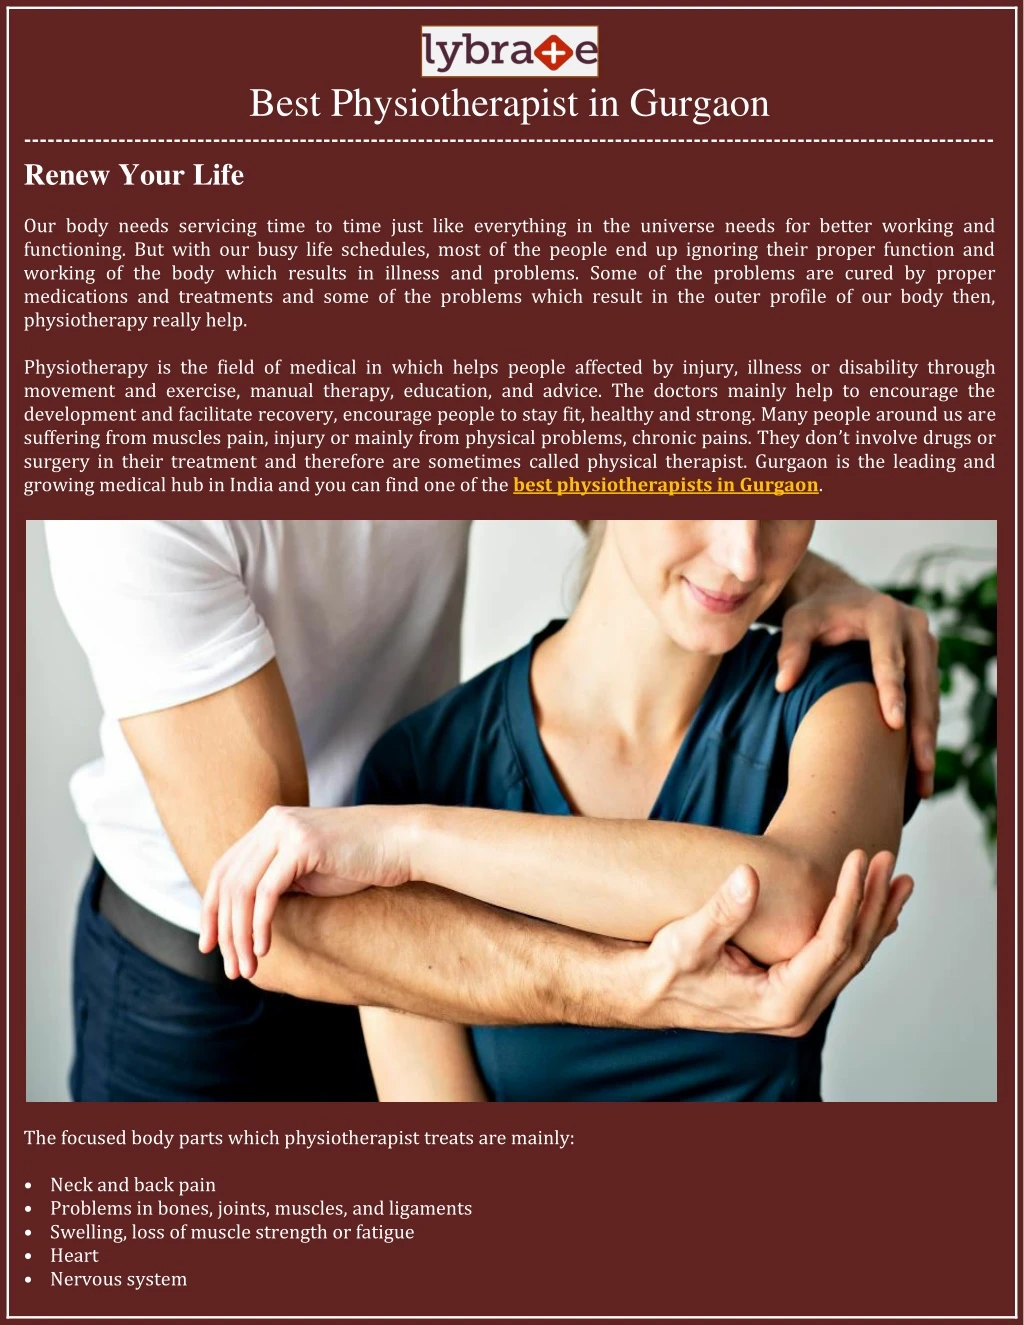 best physiotherapist in gurgaon renew your life